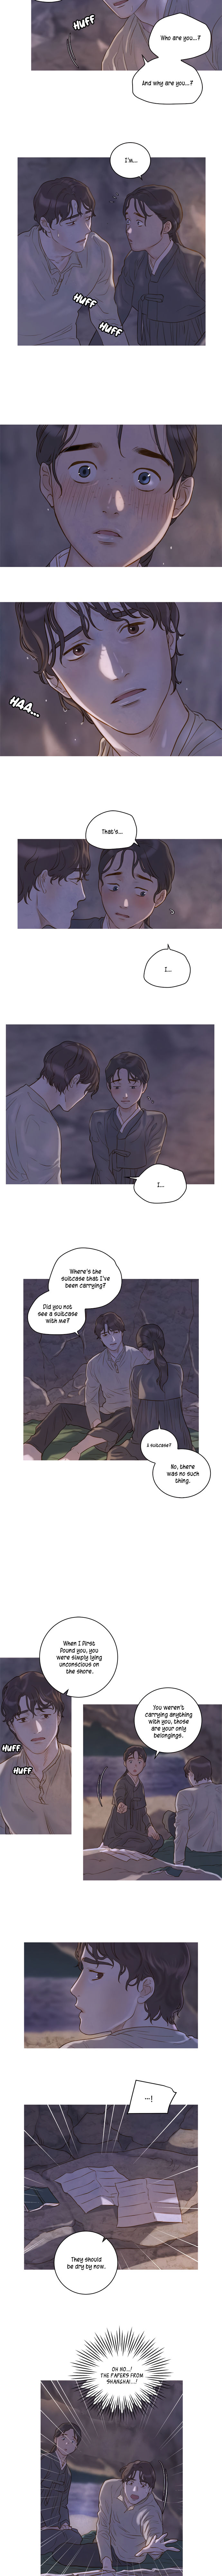 The Whale Star - The Gyeongseong Mermaid - Chapter 3 Page 2